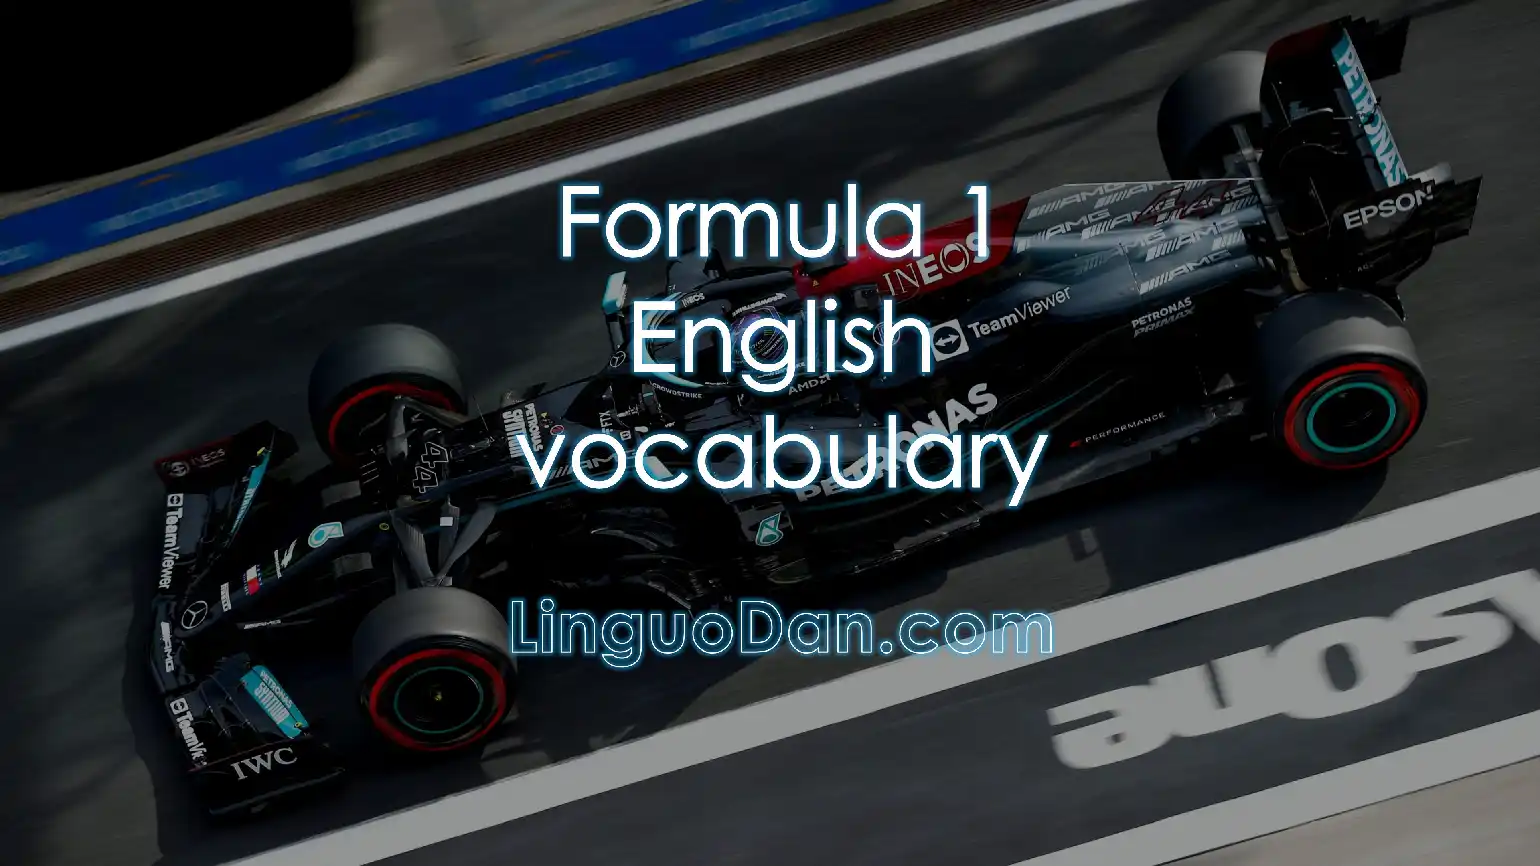 Formula 1 English Vocabulary: Understanding Racing Terms in 